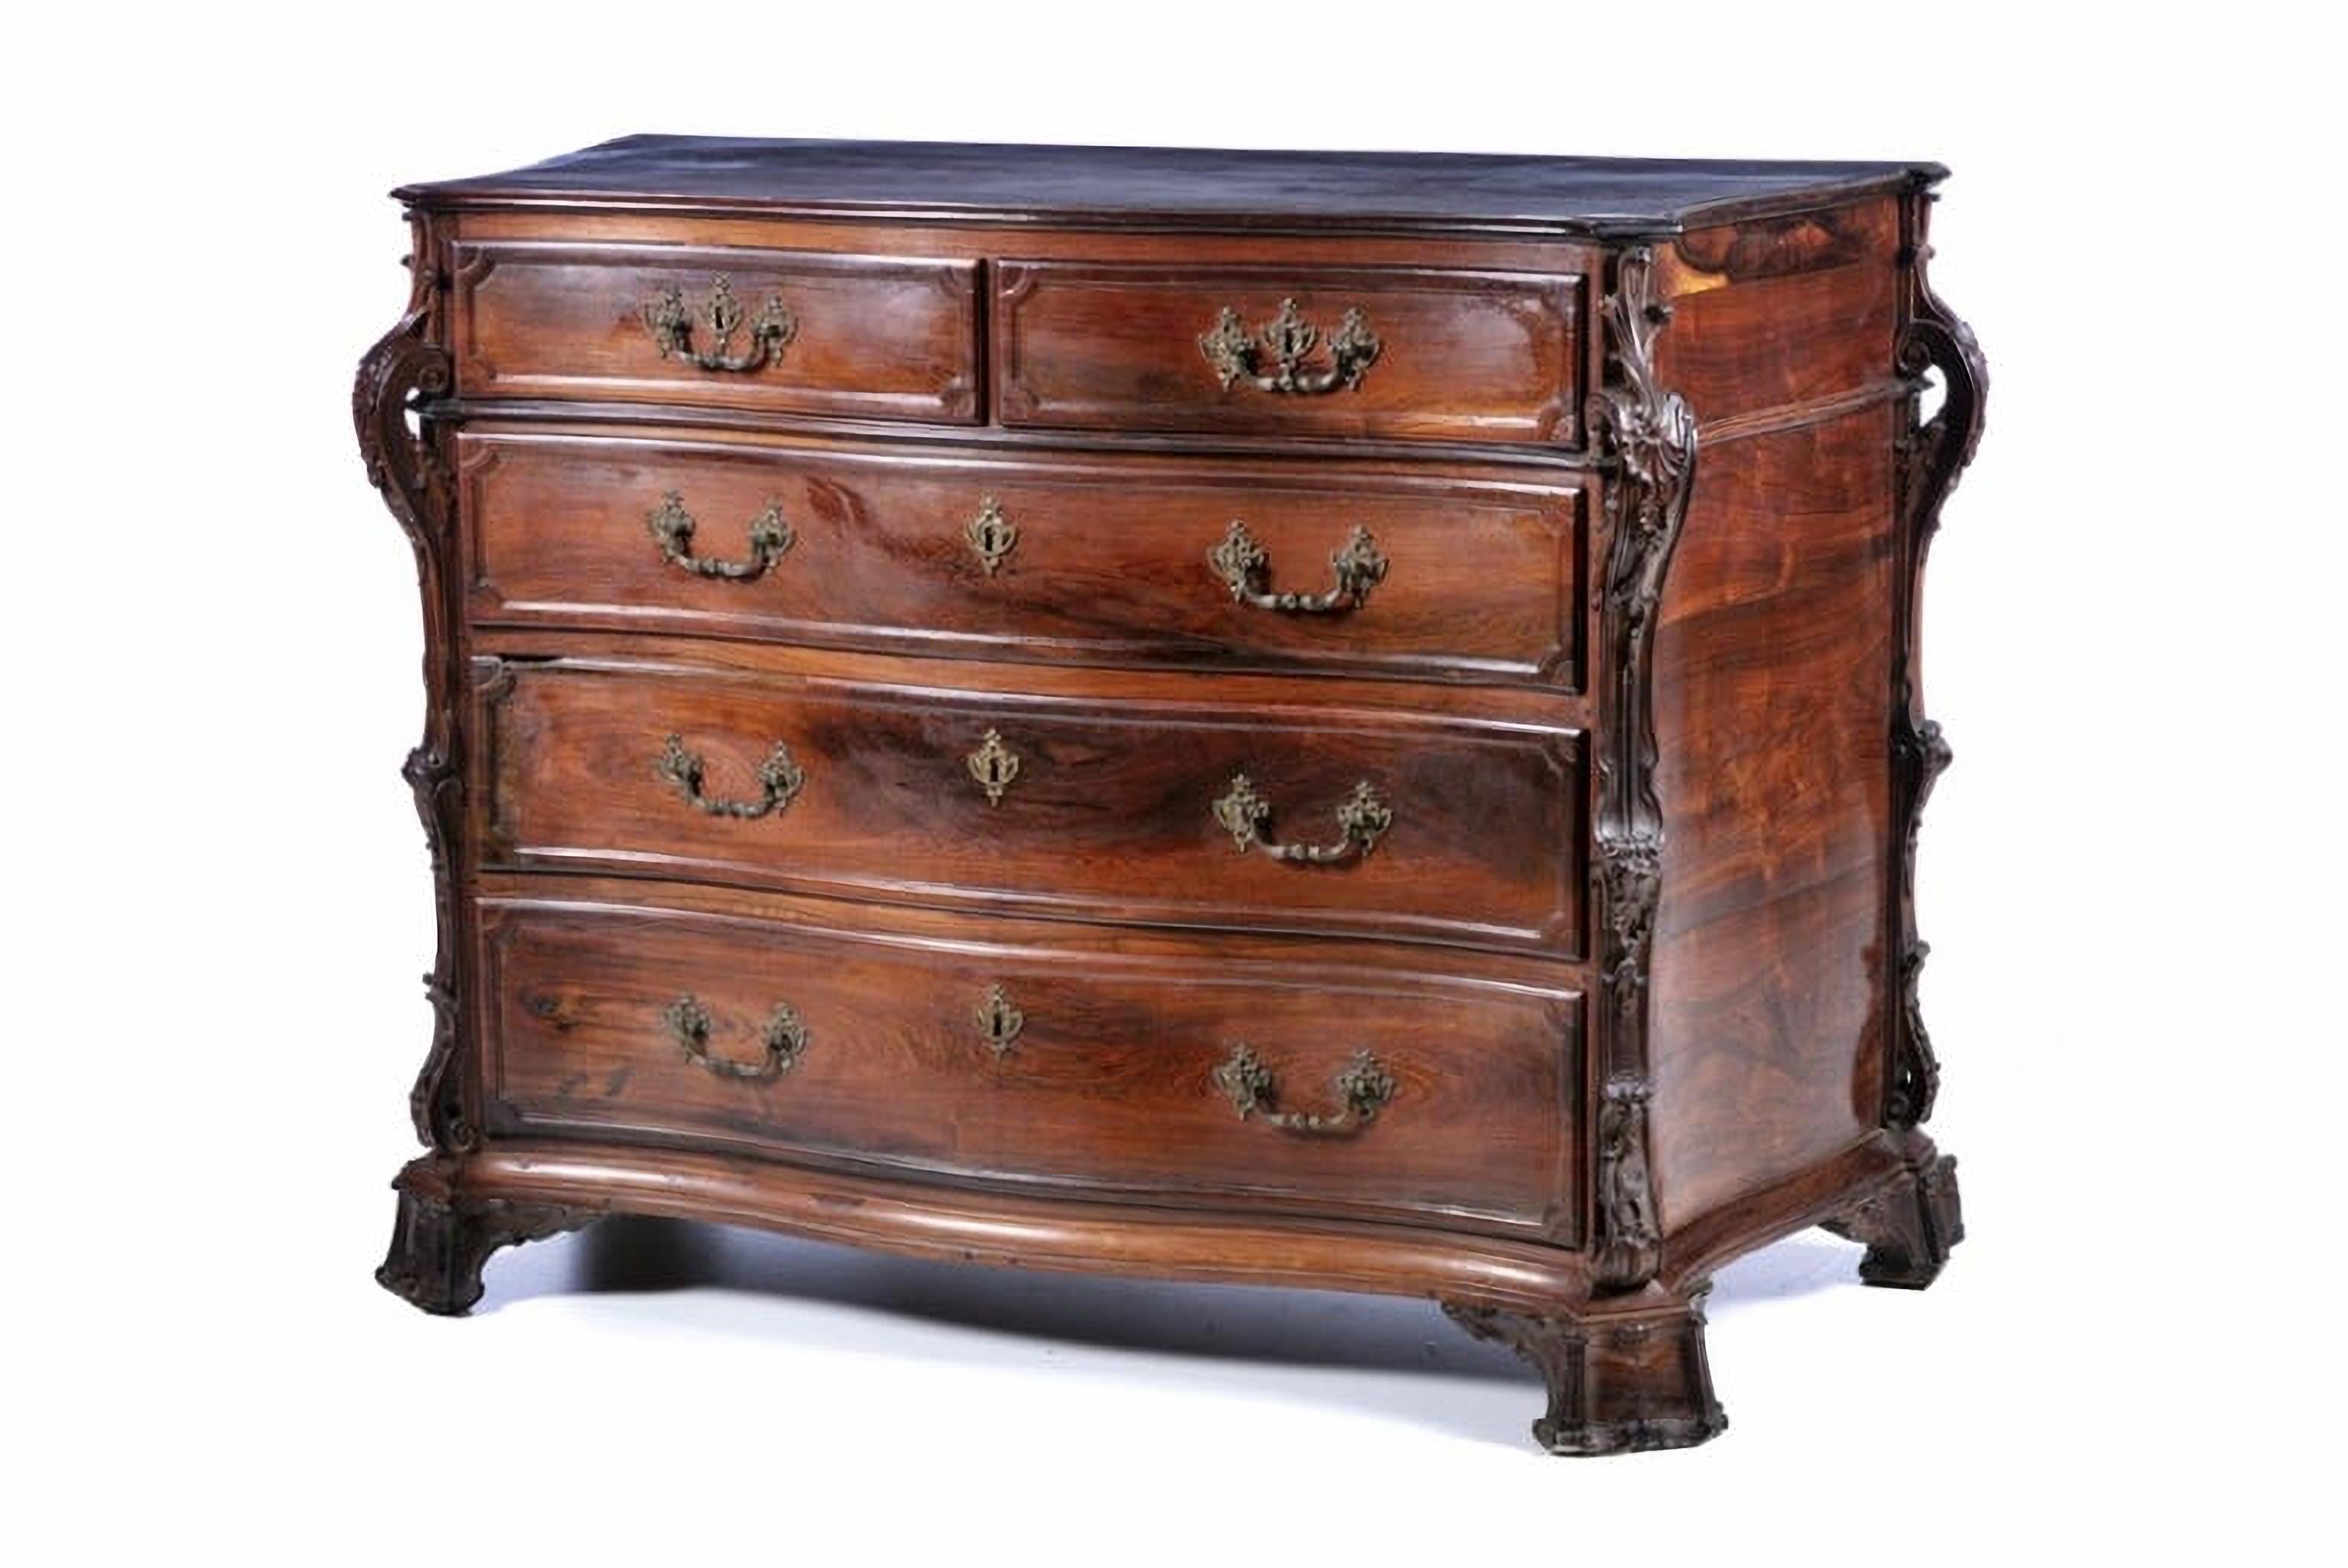 Important Portuguese Commode
18th Century
in carved Brazilian rosewood, with 2 drawers
Wavy body, protruding carved pilasters, decorated with vegetal rolls.
Sits on curved feet ending in curls.
Bronze
Measures: 105cm x 137cm x 65
Very good condition.